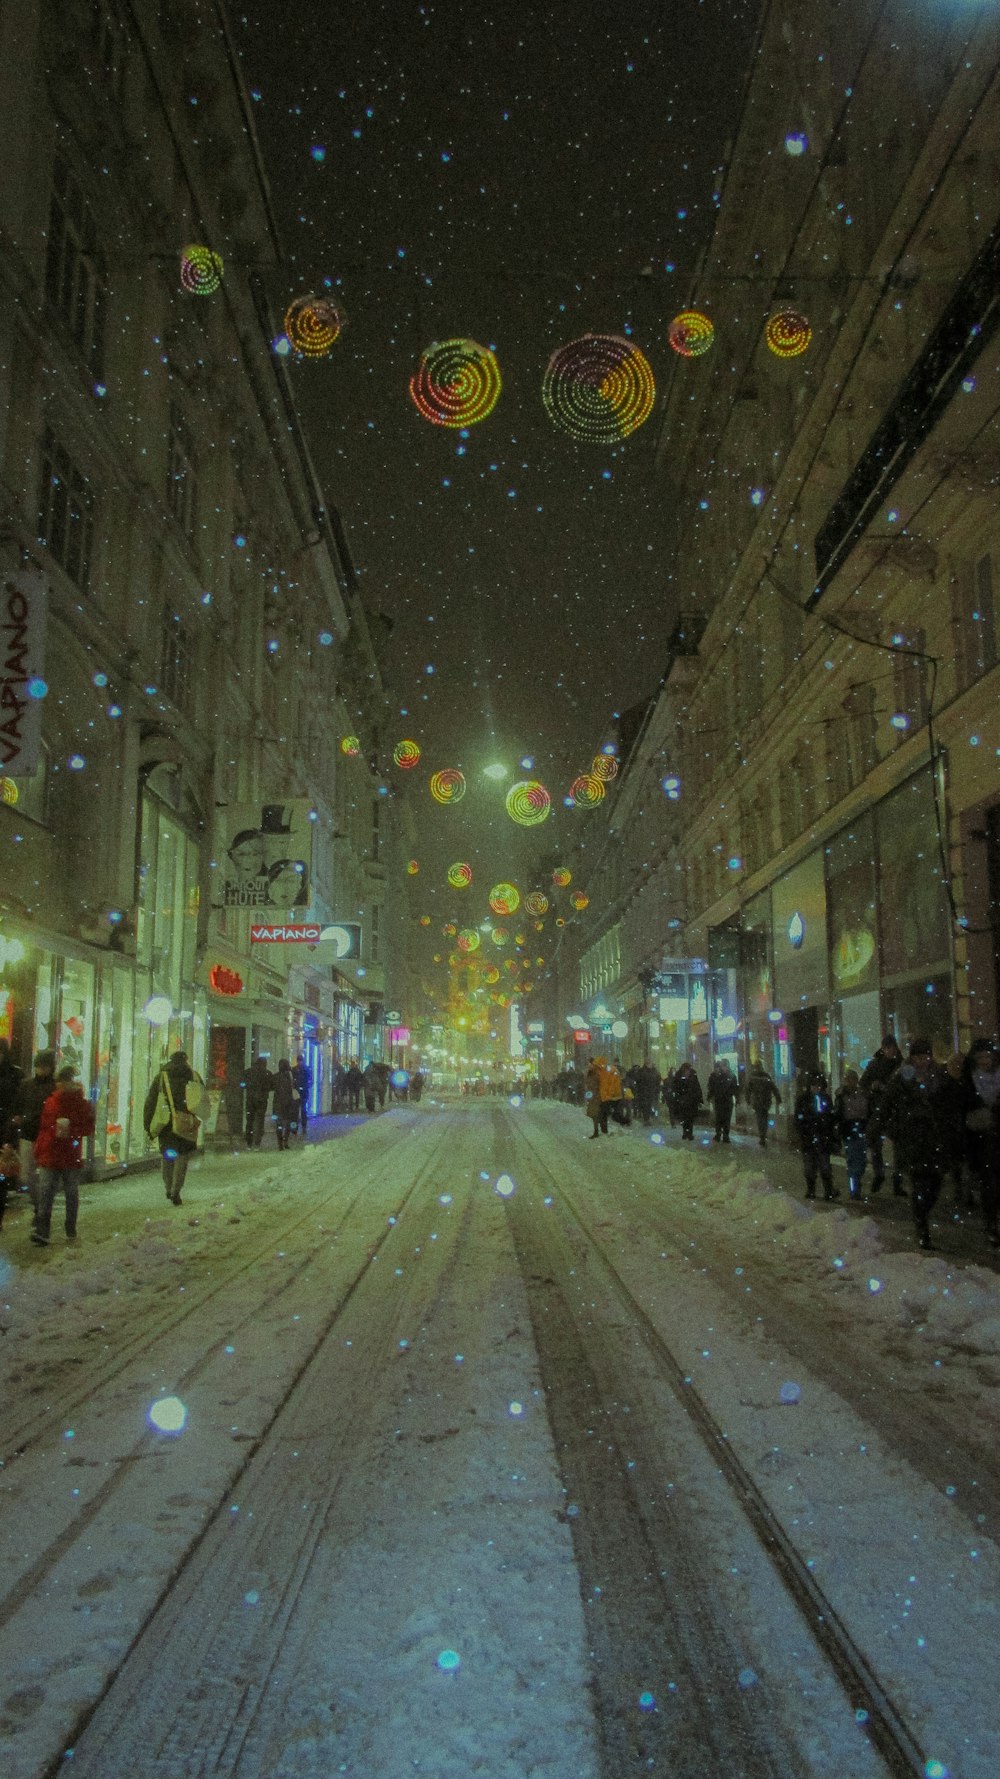 people walking down a snowy street at night